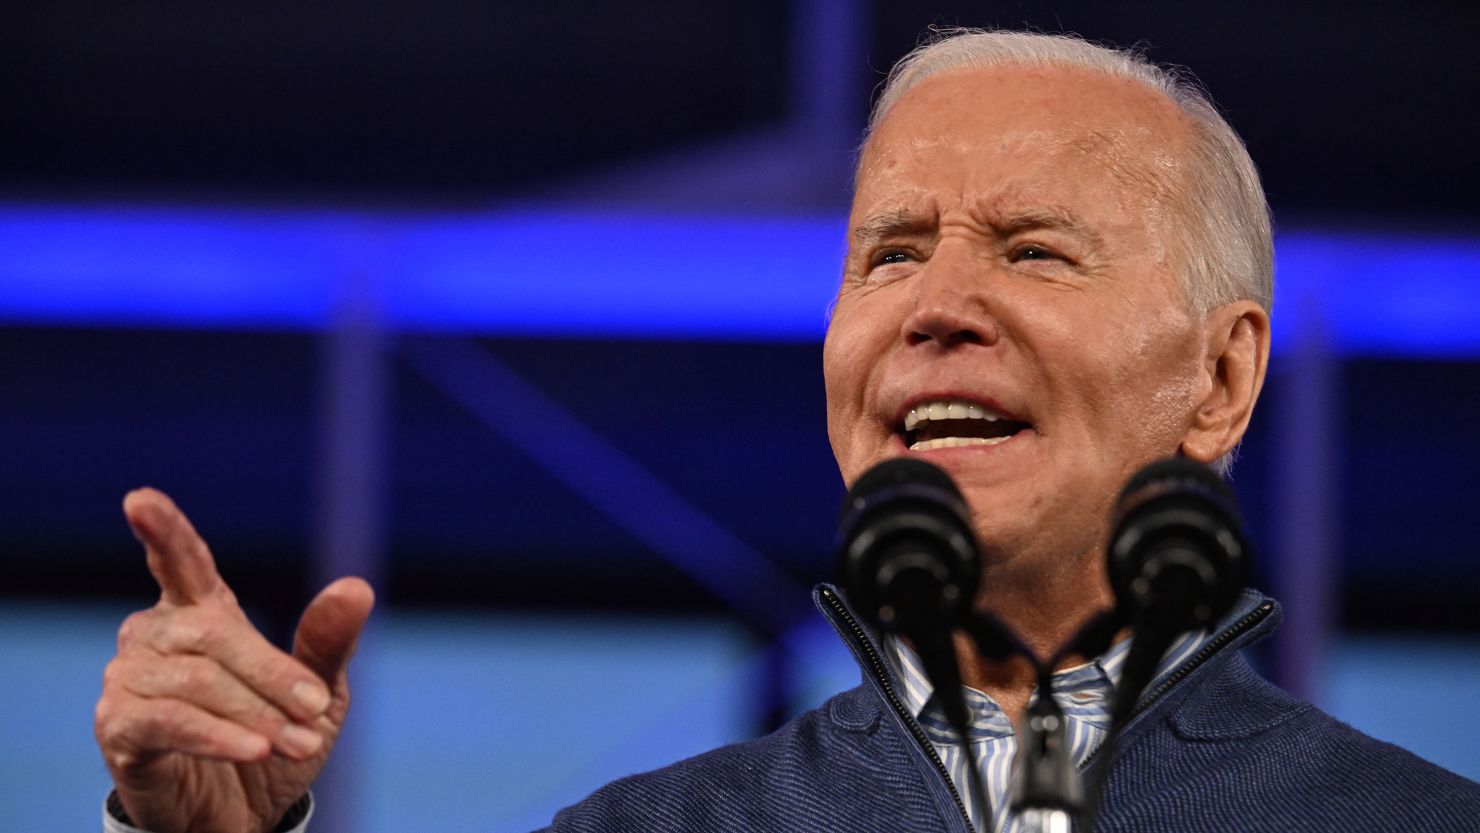 Biden takes on Trump as he brings reelection pitch to Pennsylvania in